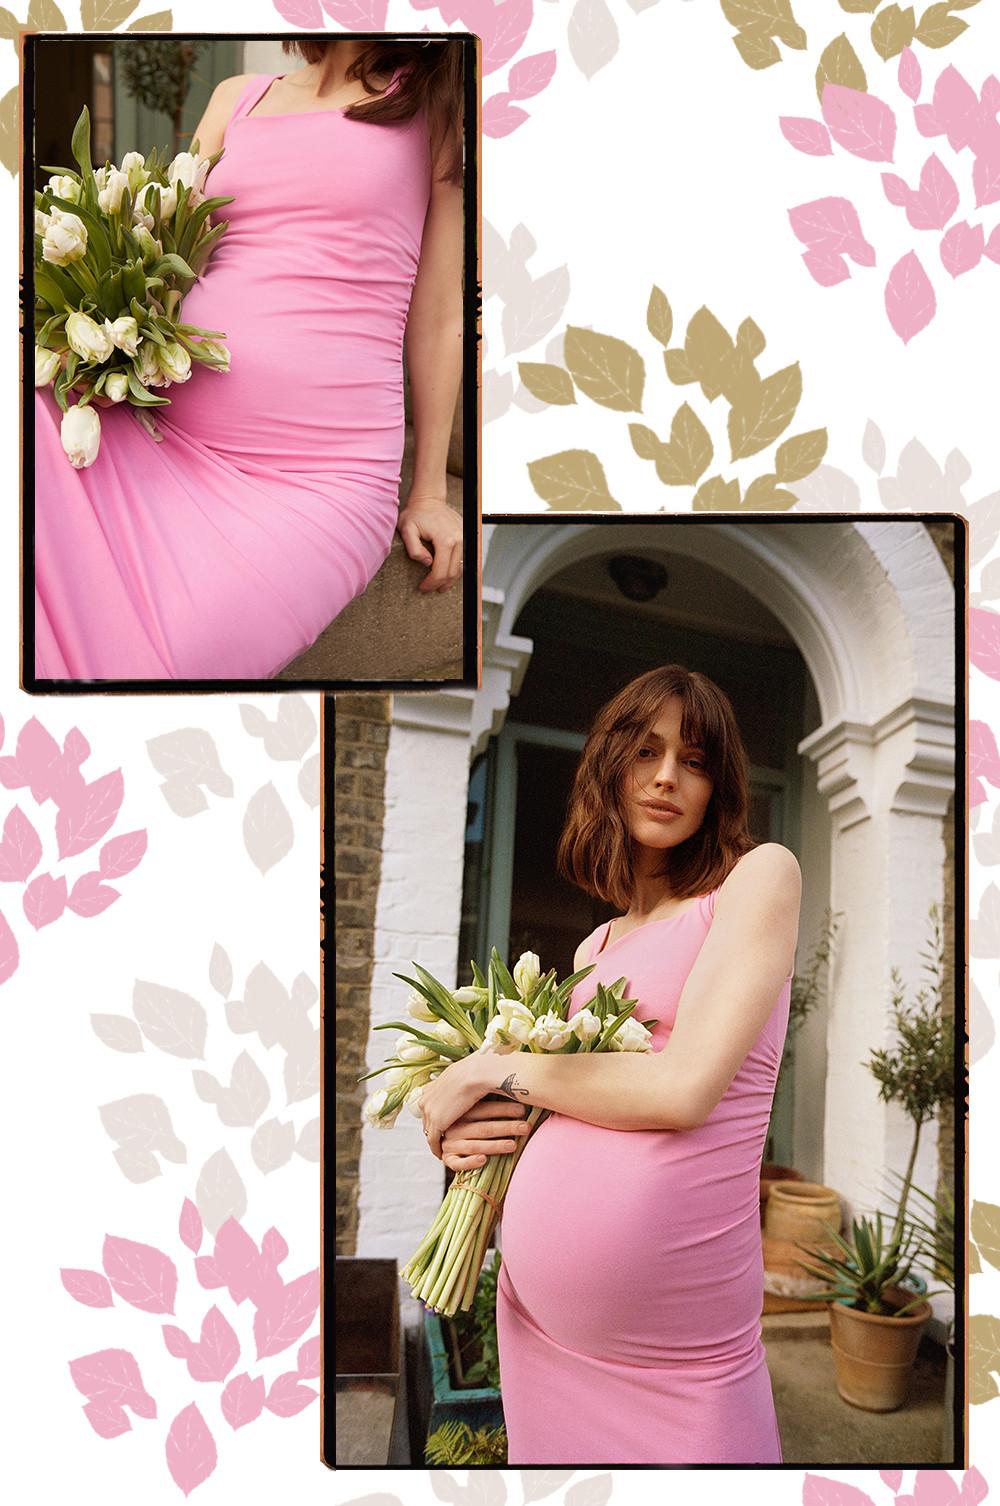 Model wears pink midi dress, while holding a bunch of white tulips